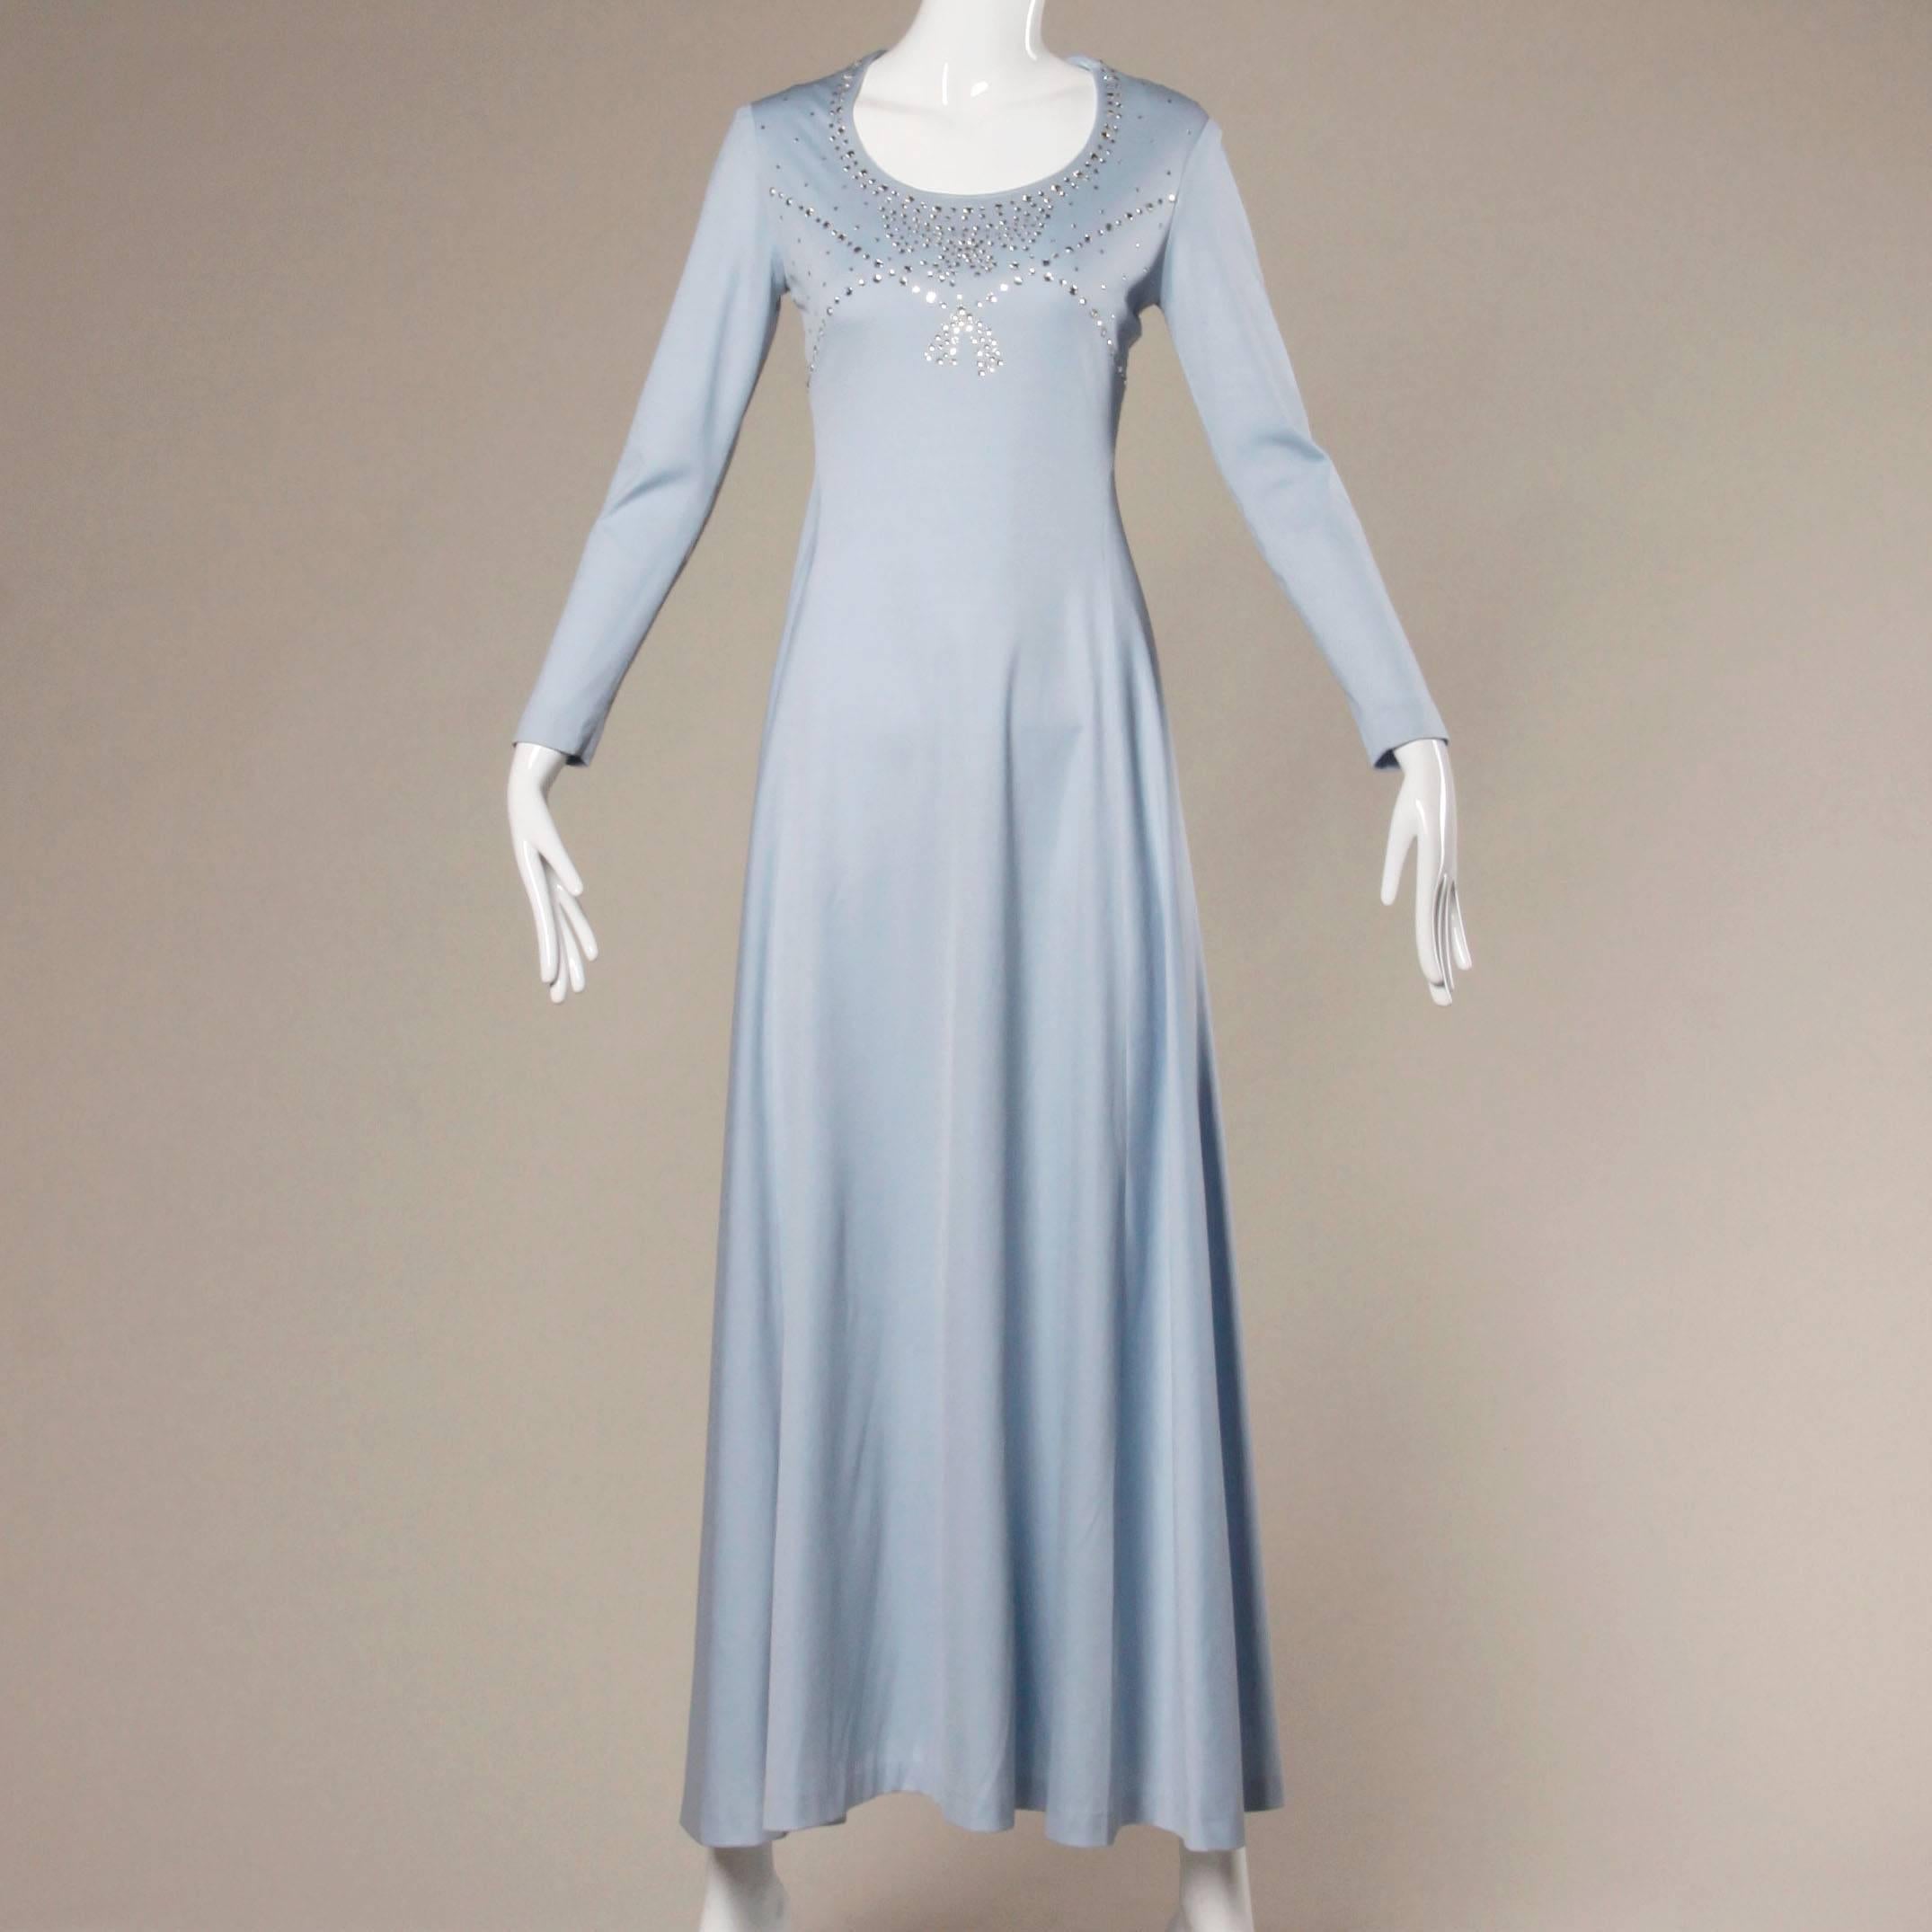 Gorgeous vintage 1970s jersey knit maxi dress with prong-set rhinestones and long sleeves. Scoop neck and long length.

Details:

Unlined
Back Zip and Hook Closure 
Marked Size: Not Marked
Estimated Size: Medium
Color: Pale Blue
Fabric: